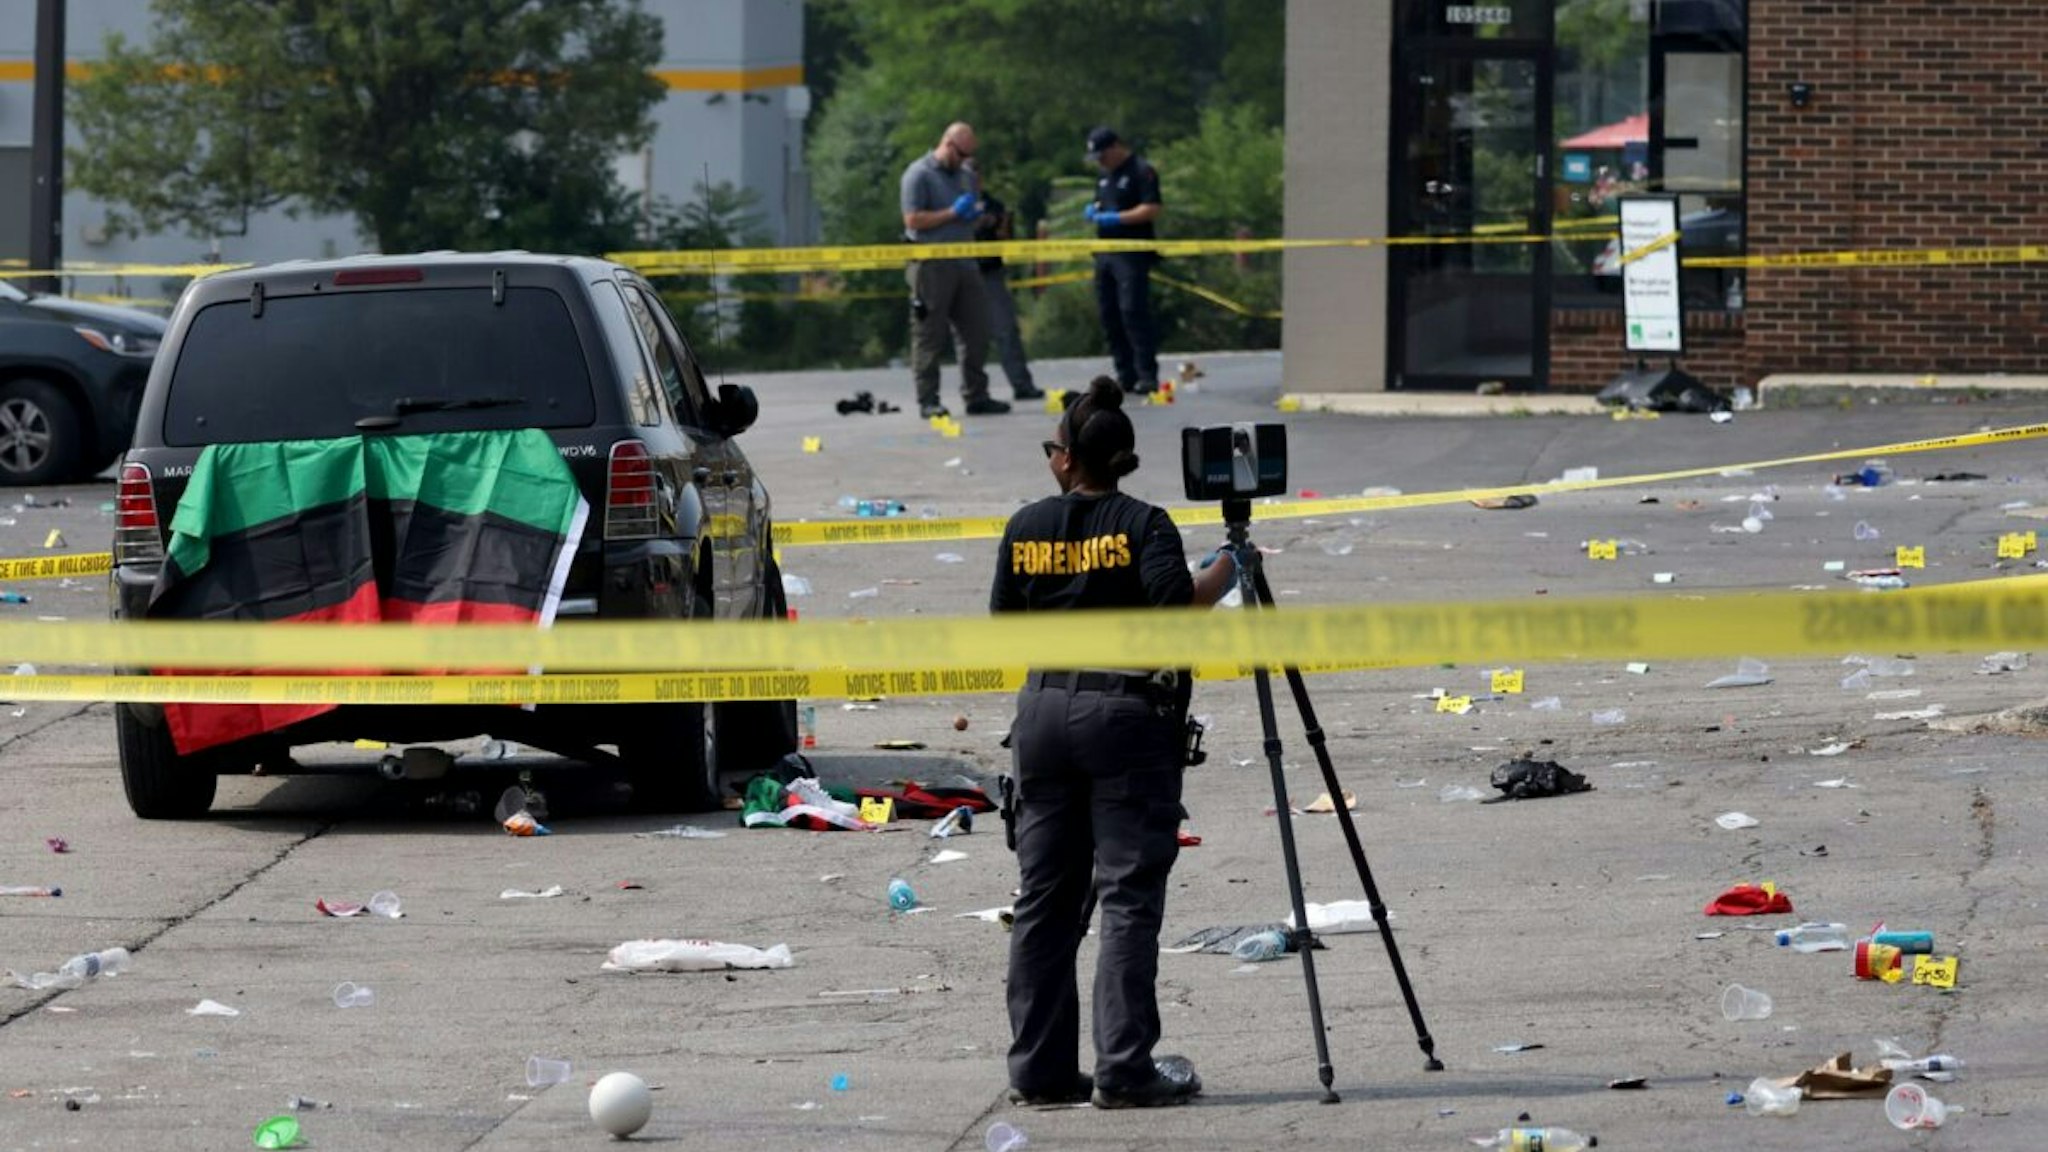 Police investigate the scene where approximately 16 people were shot, one fatally, in a parking lot outside BCD Liquors in Willowbrook, Illinois in the early hours of June 18, 2023.